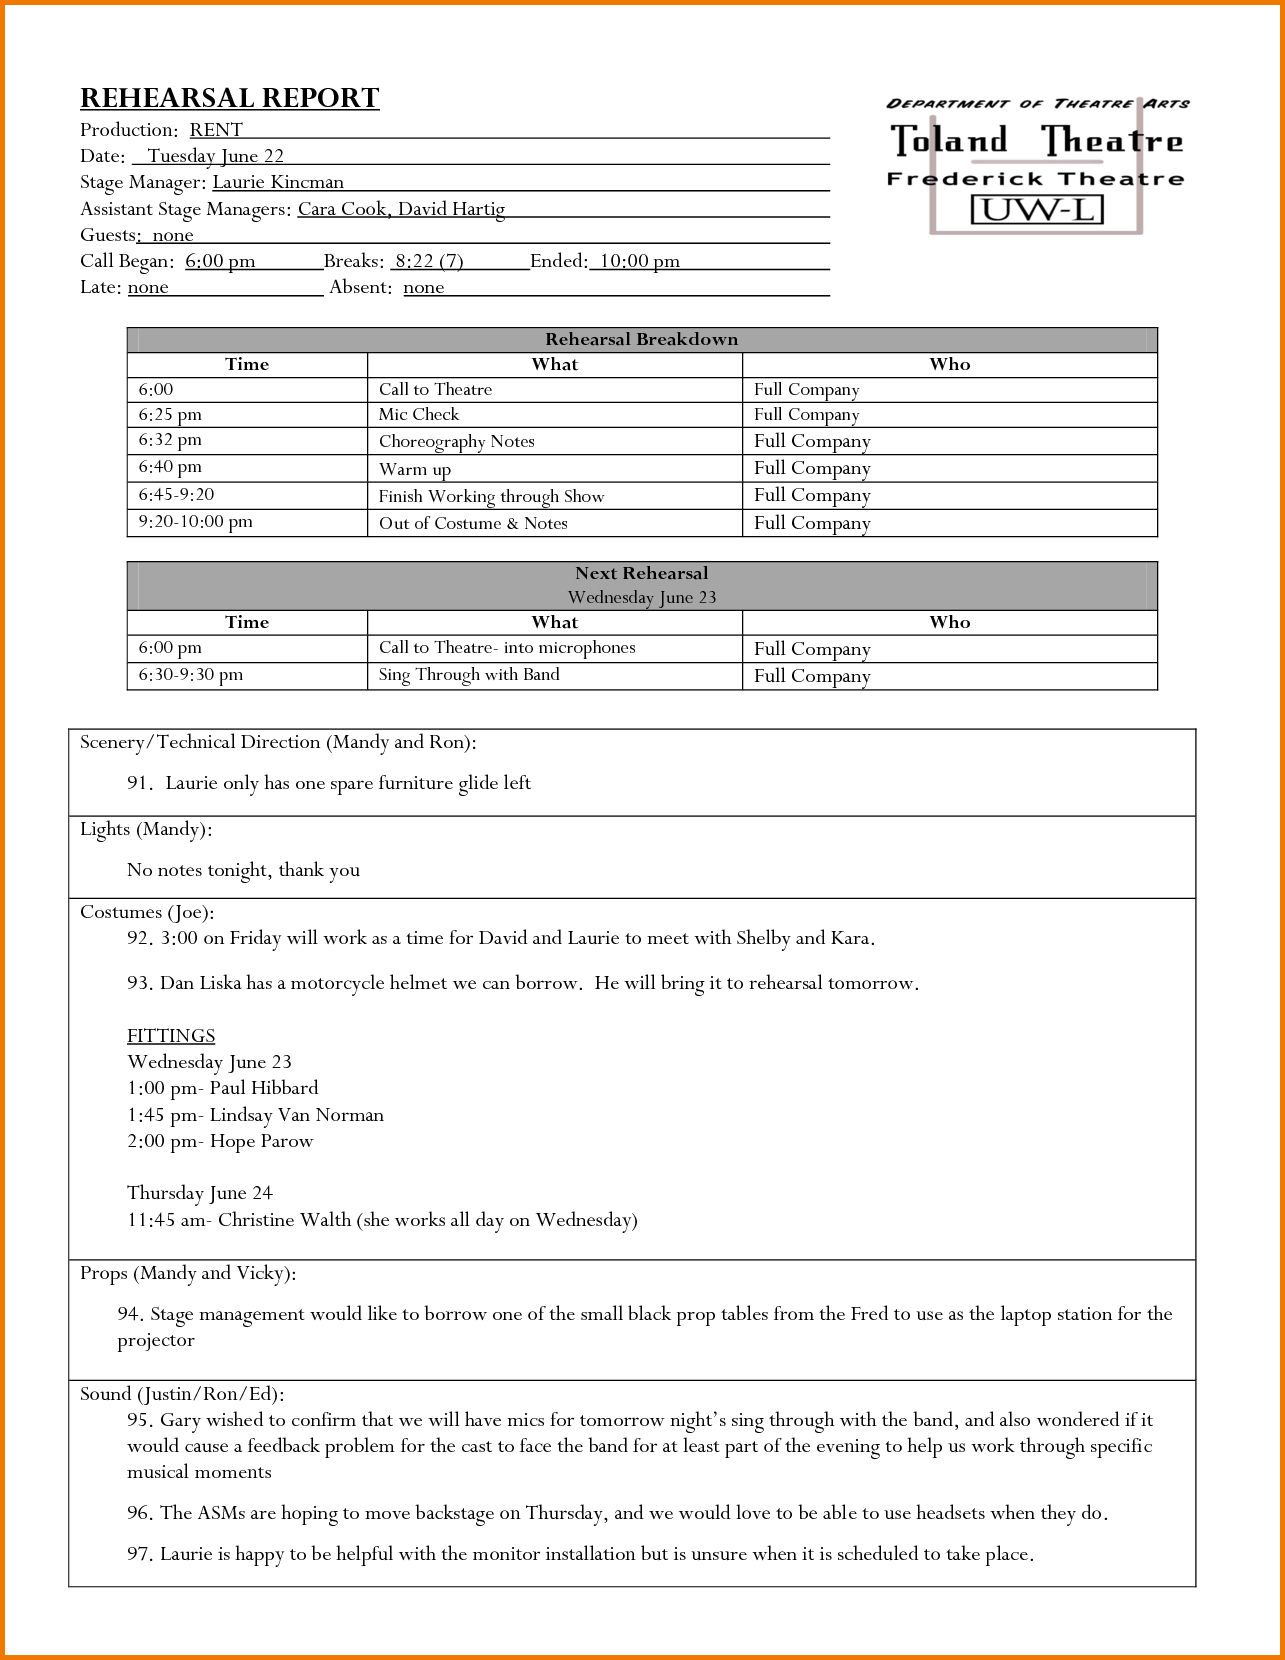 Rehearsal Report Template Editable Digital Expense | Stage With Regard To Rehearsal Report Template